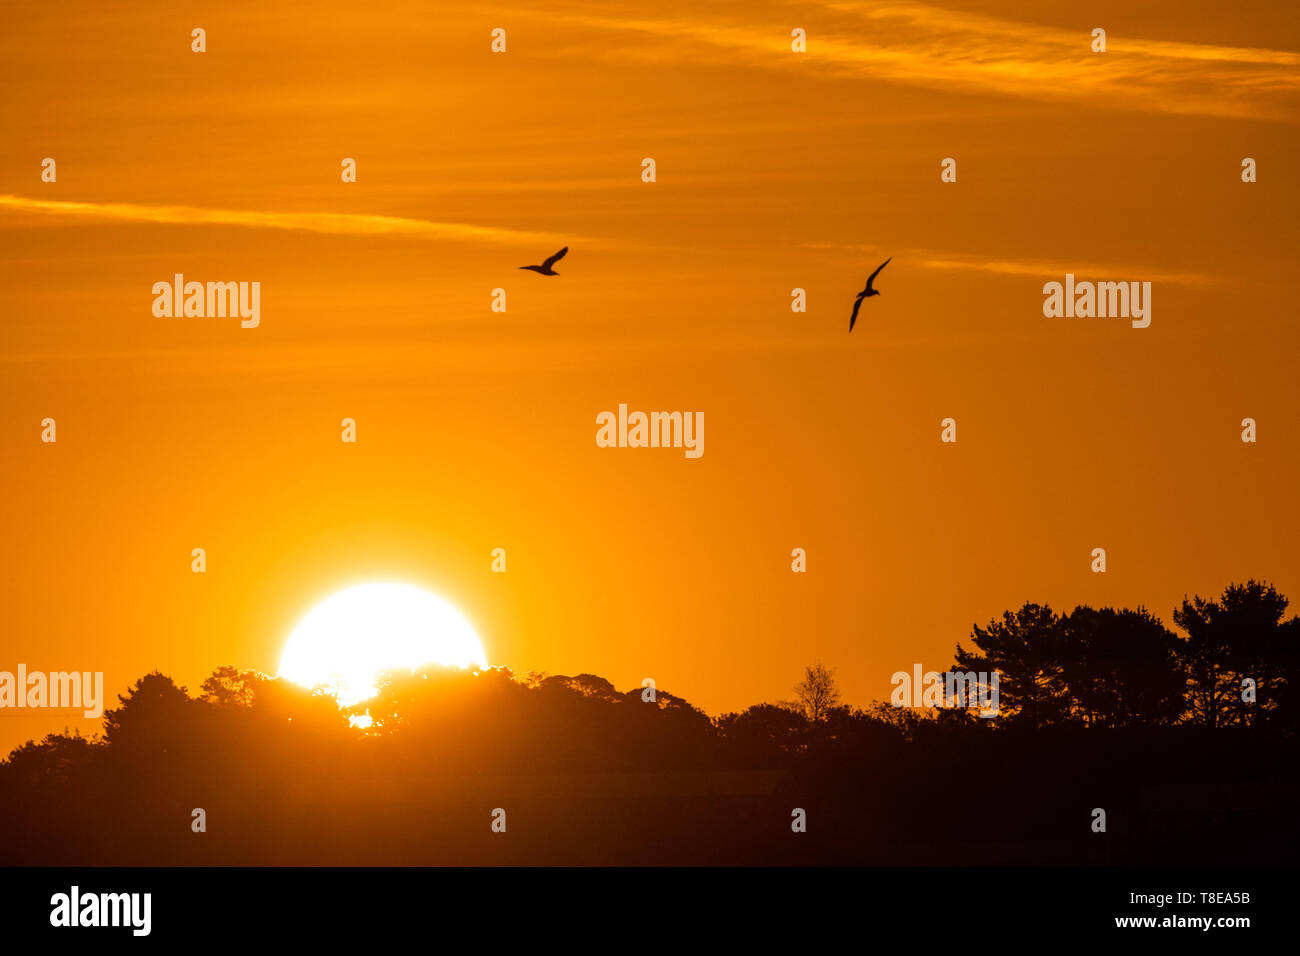 Aberystwyth Wales UK, Monday 13 May 2019  UK Weather: Sunrise over  Aberystwyth on the Cardigan Bay coast, West Wales, at the start  of a day forecast to be with clear blue skies and warm spring sunshine as pressure rises across the country over the coming days  photo credit Keith Morris / Alamy Live News Stock Photo